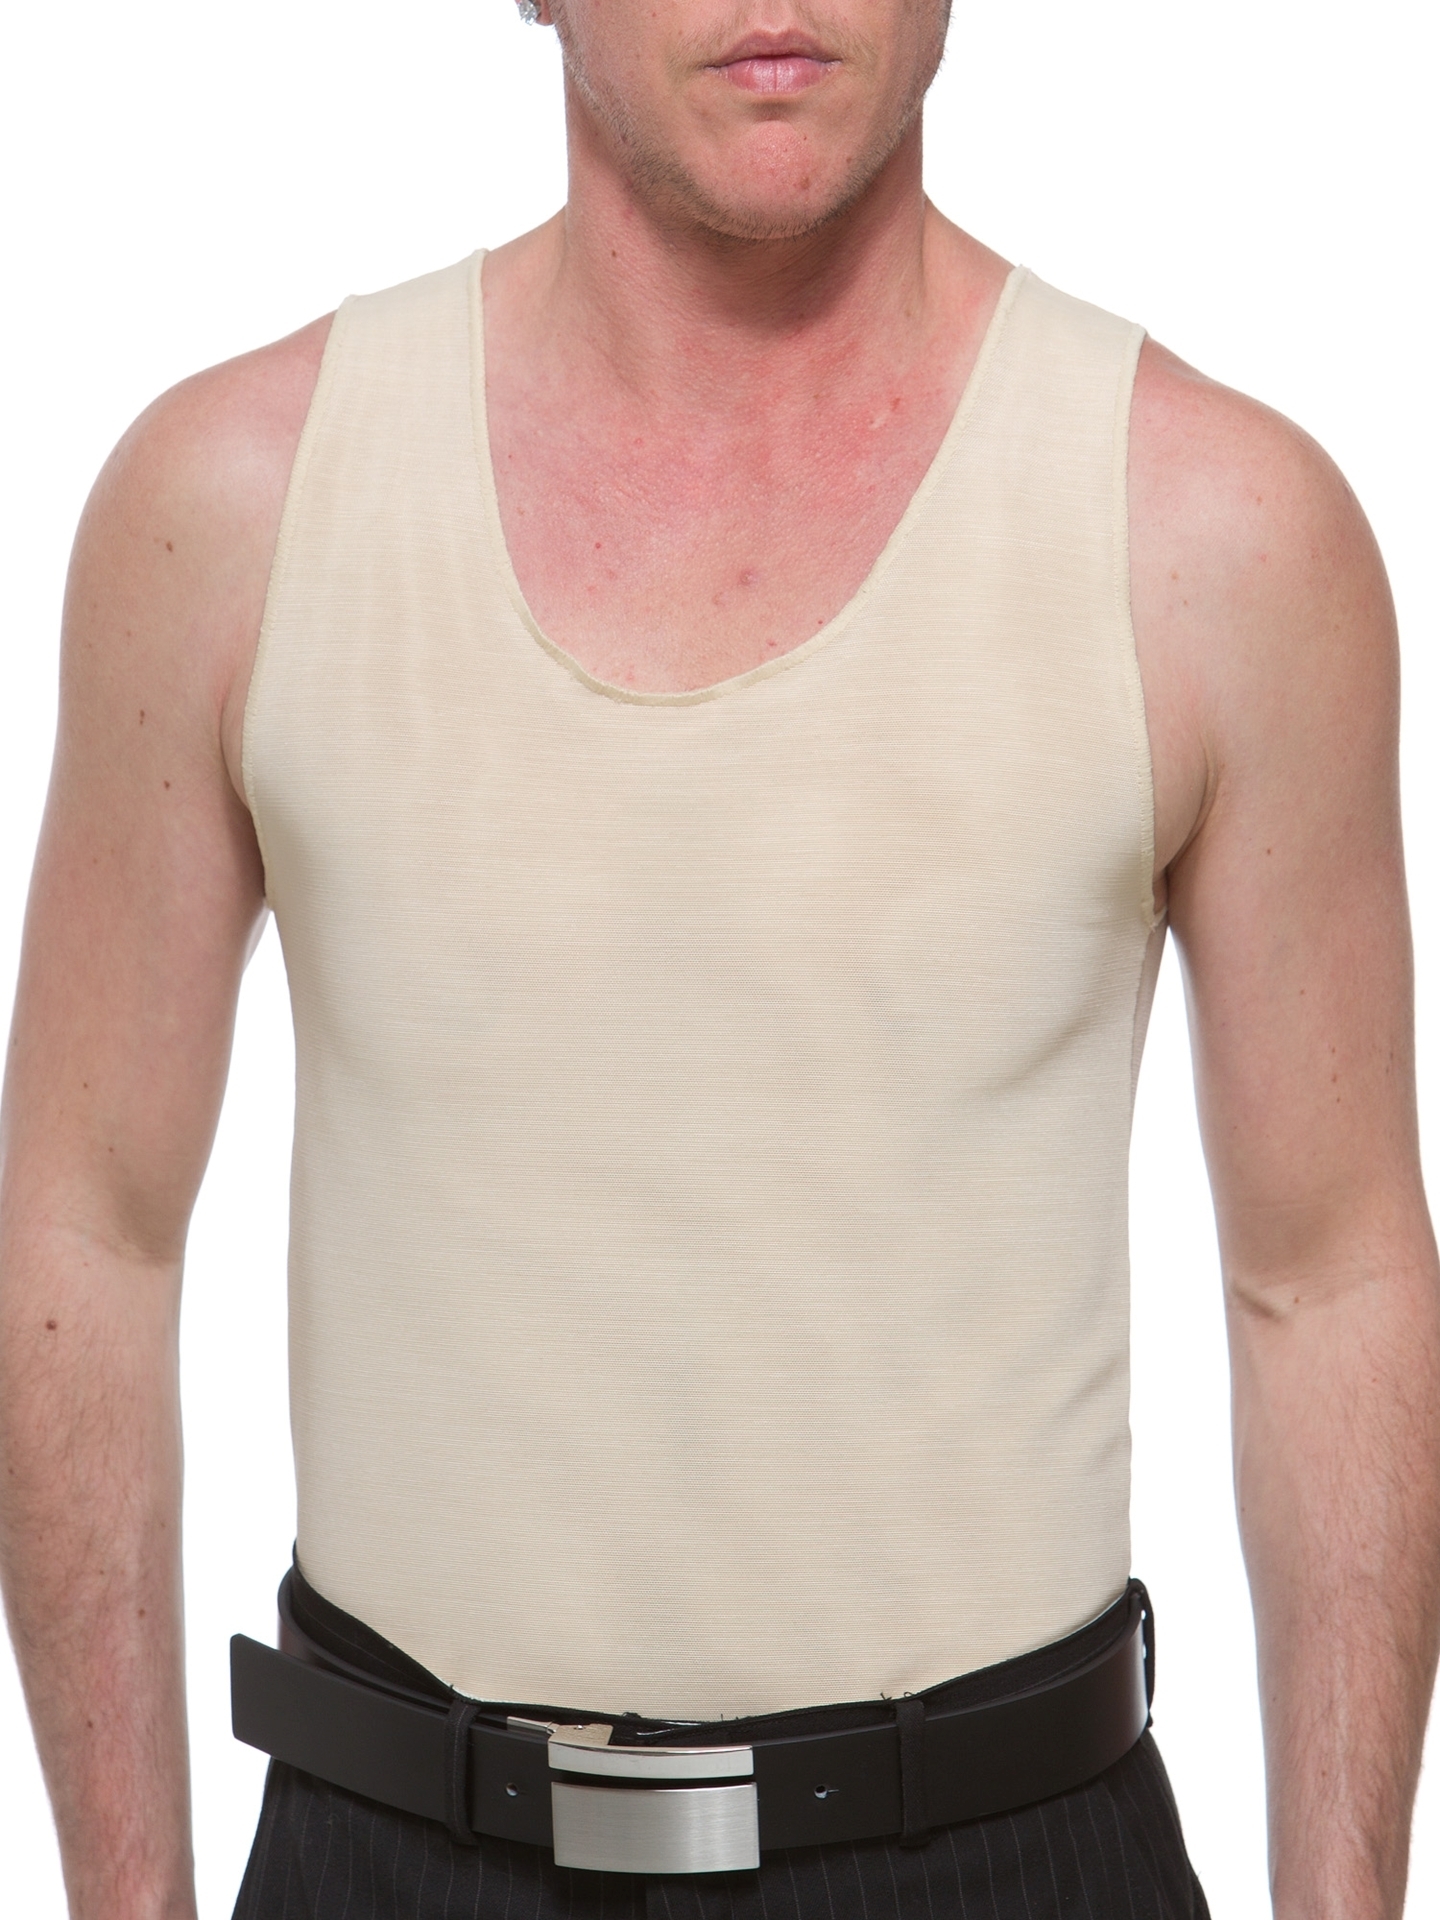 Ultimate Chest Binder Tank. FTM Chest Binders for Trans Men by Underworks